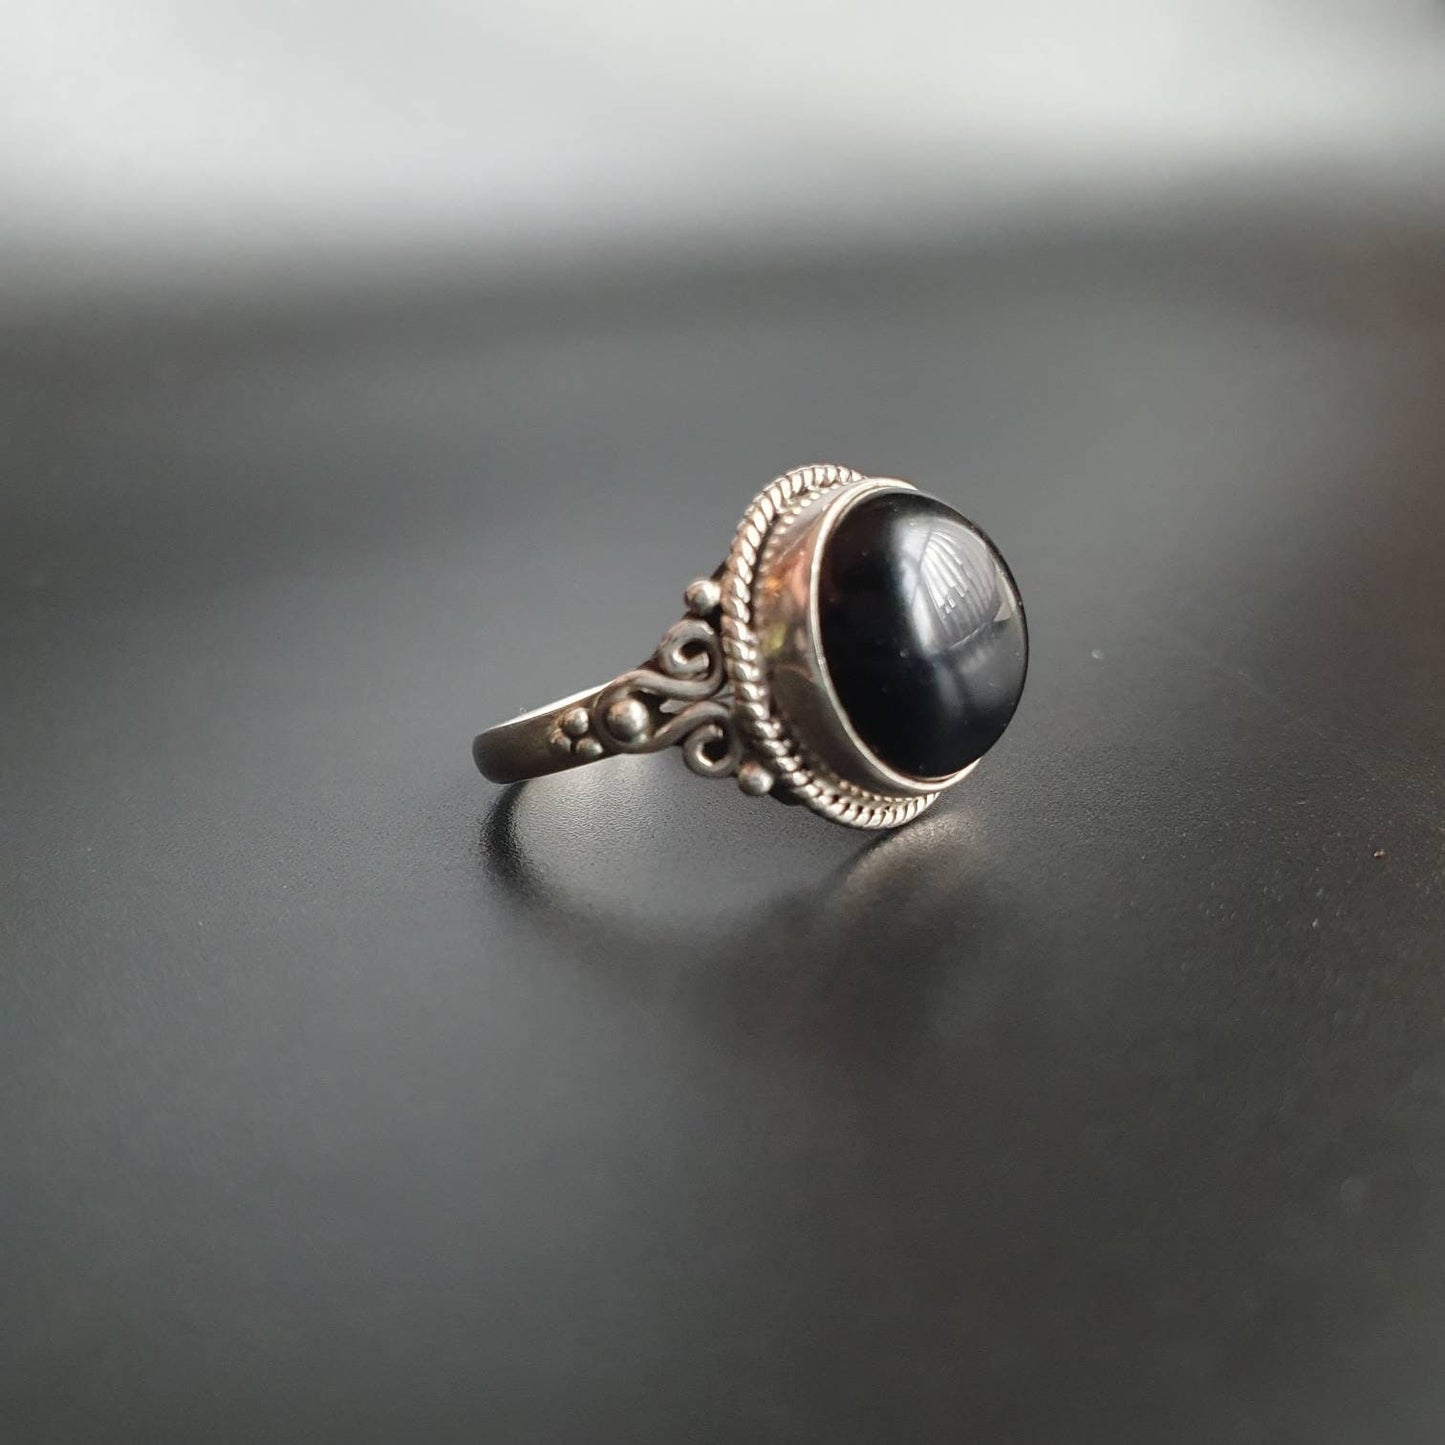 Silver ring, gothic Ring, tribal jewelry, sterling silver ring, statement ring, unisex ring, witchy cult, gypsy witch,boho witch,925, onxy